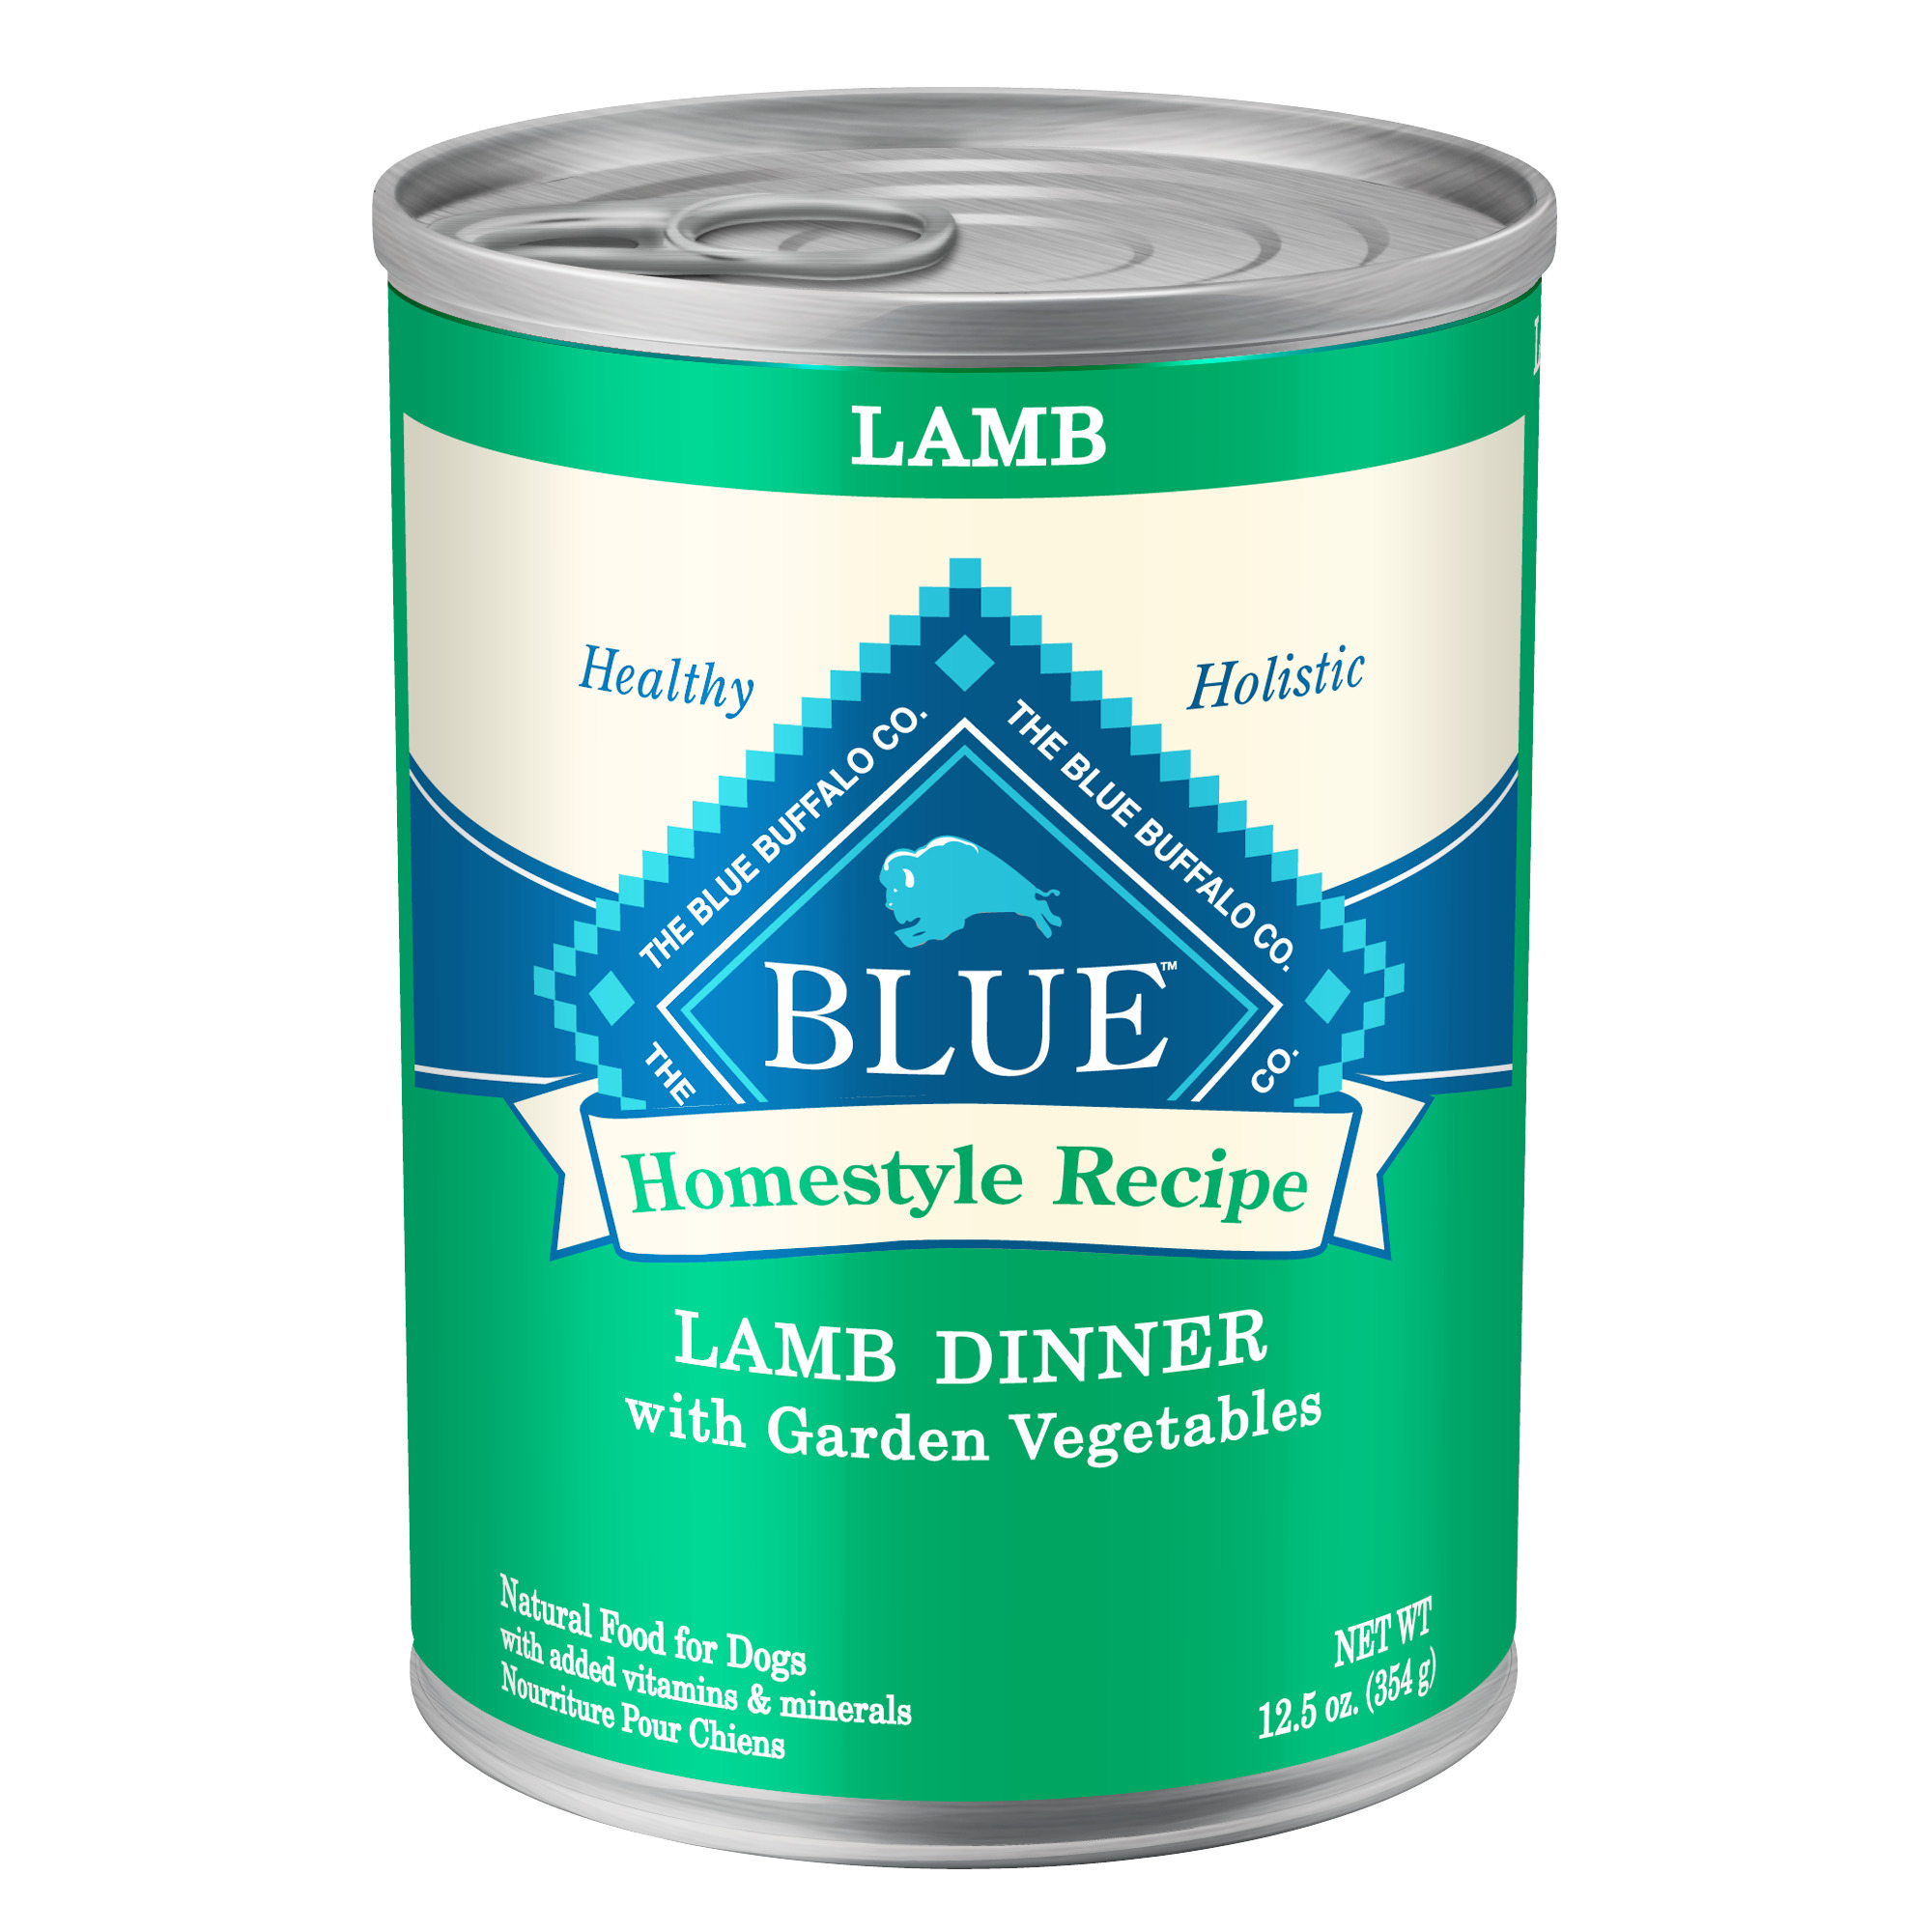 BLUE Homestyle Recipe Lamb Dinner with Garden Vegetables for Adult Dogs, 12.5 oz